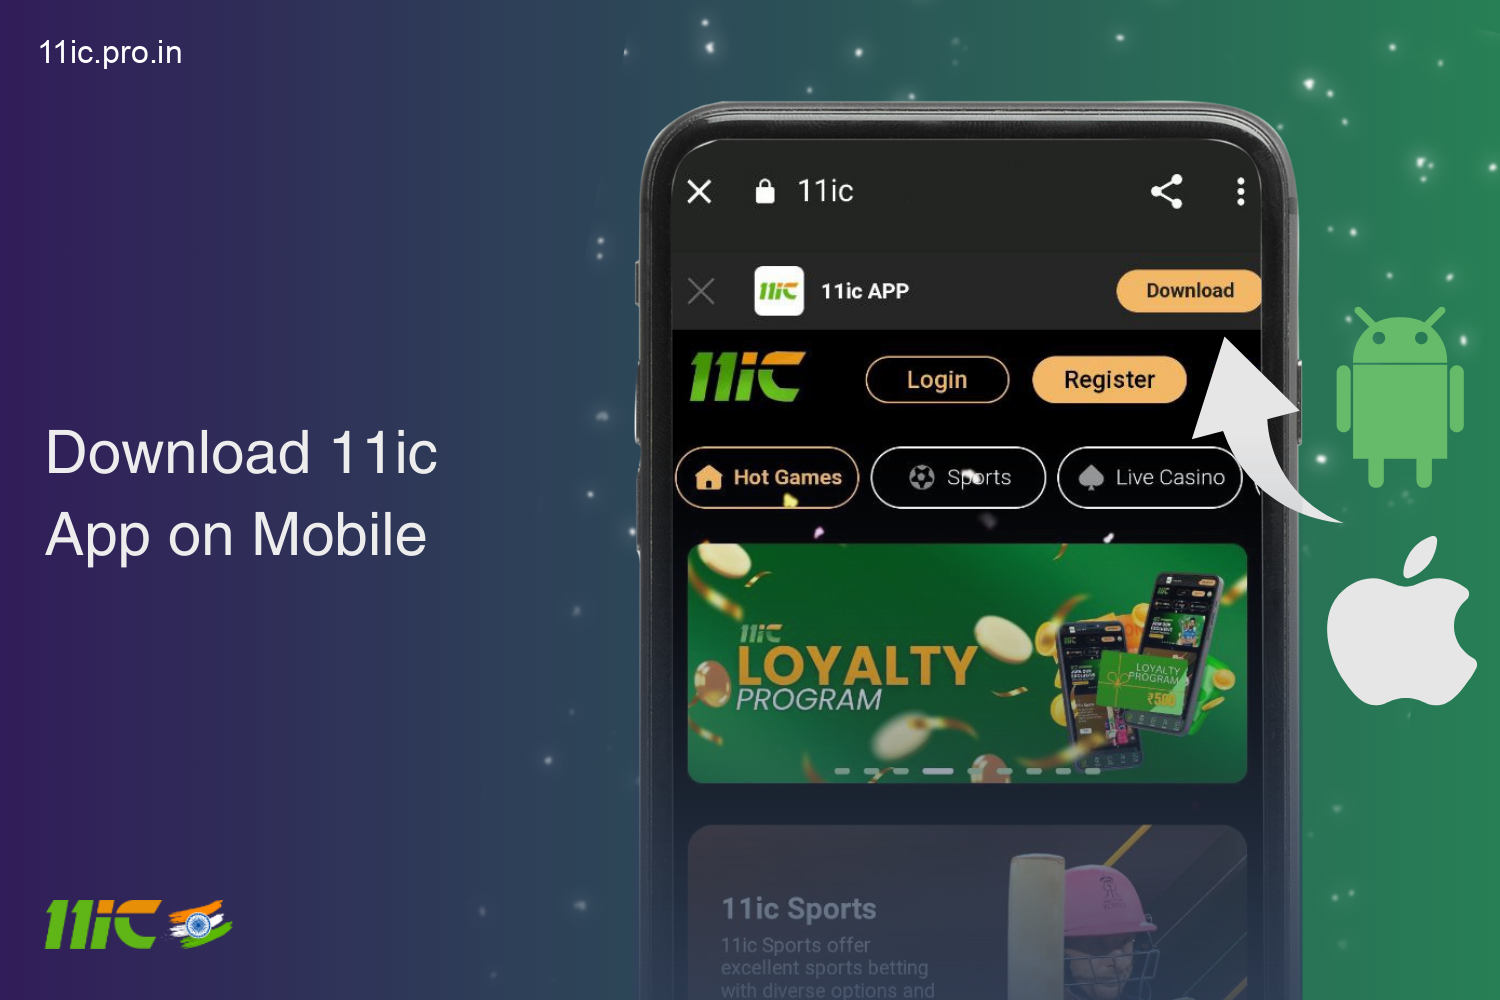 Download the 11ic app for Android and iOS and enjoy casino games and sports betting on the go with our feature-rich mobile app